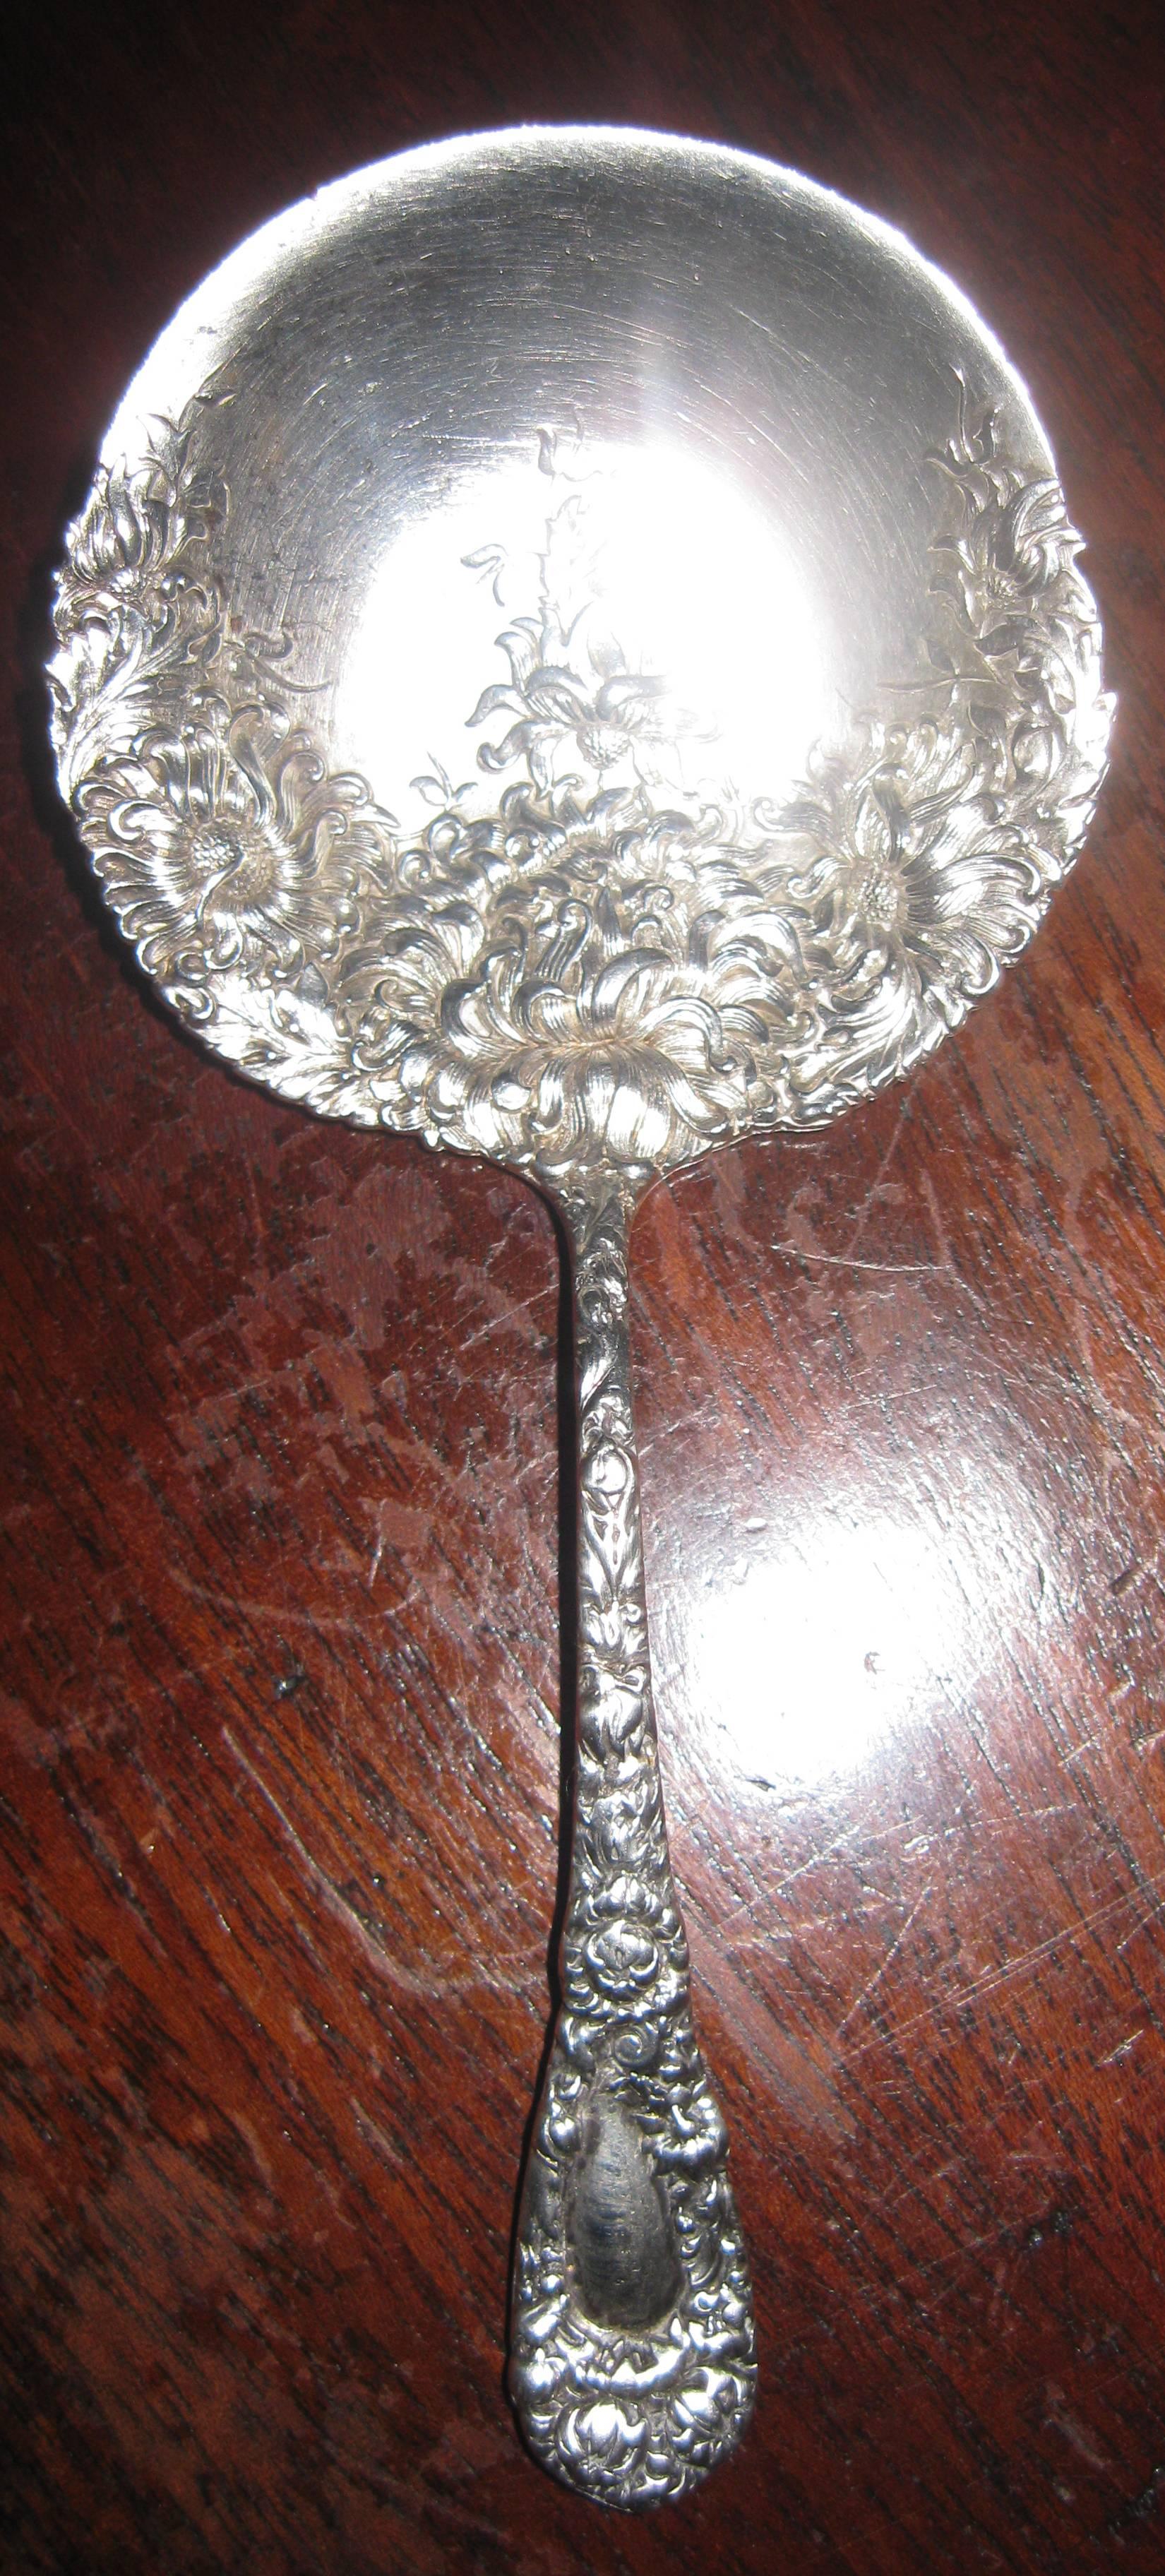 Sterling silver nut spoon made by the American company Durgin. It is in an intricate design in the chrysanthemum pattern introduced in 1893 and designed by George A. Muller. The piece is marked Sterling, 925/1000, B.B. &  B (the prestigious firm of